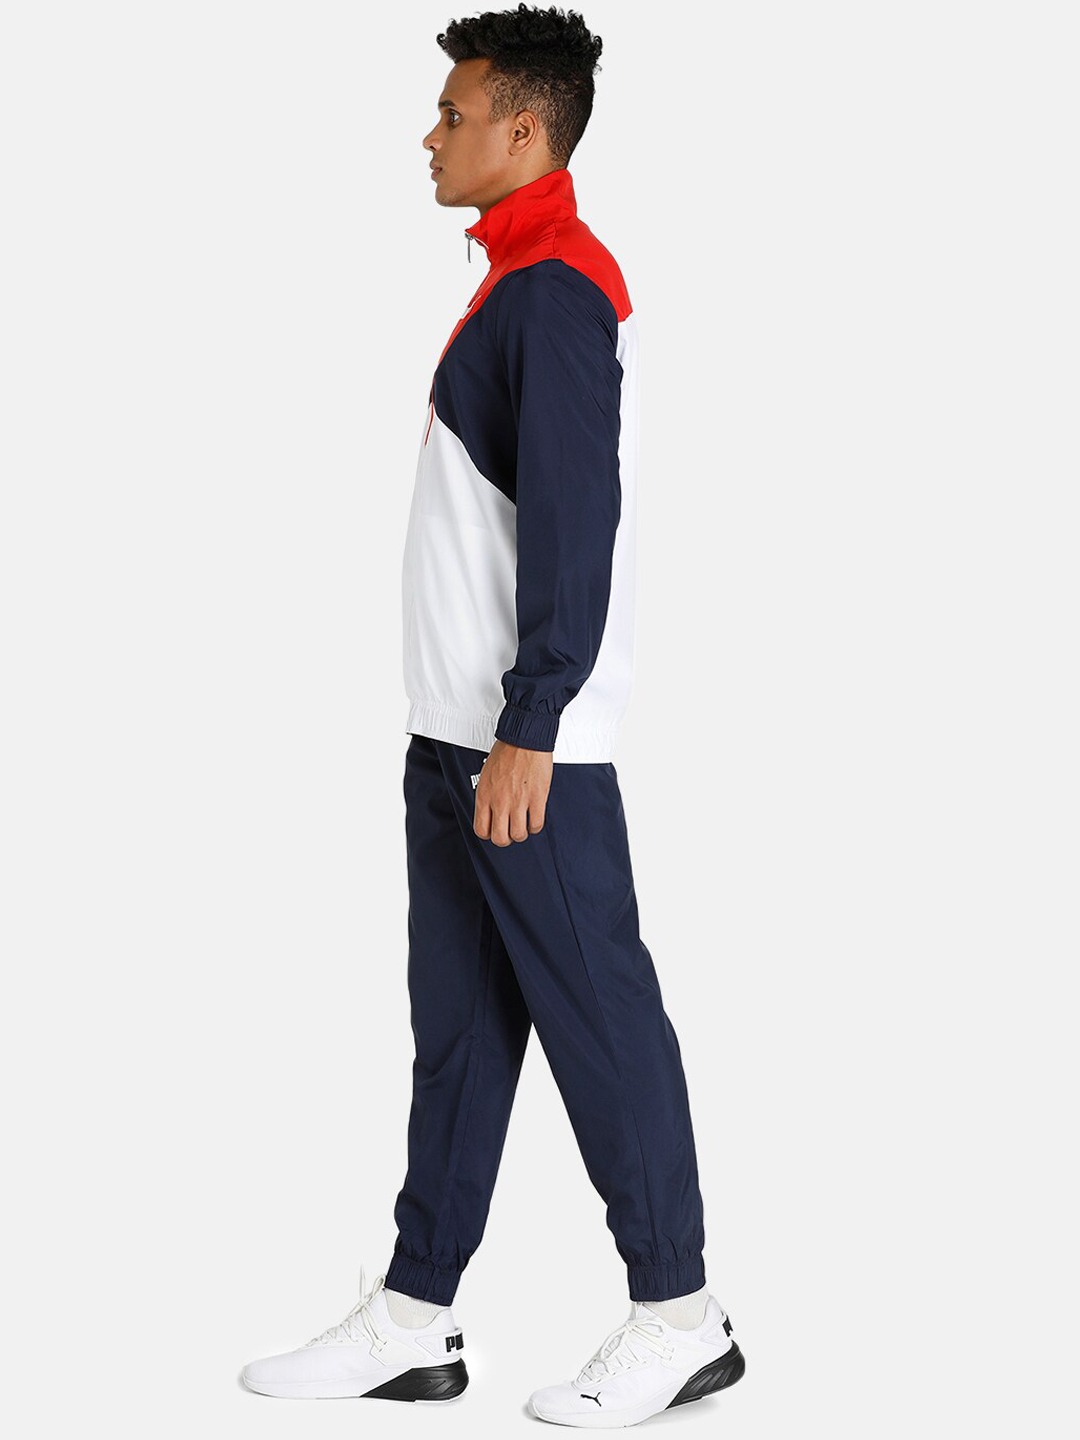 Clothing Tracksuits | Puma Men Navy Blue & Red Colourblocked Track Suit - EY94625